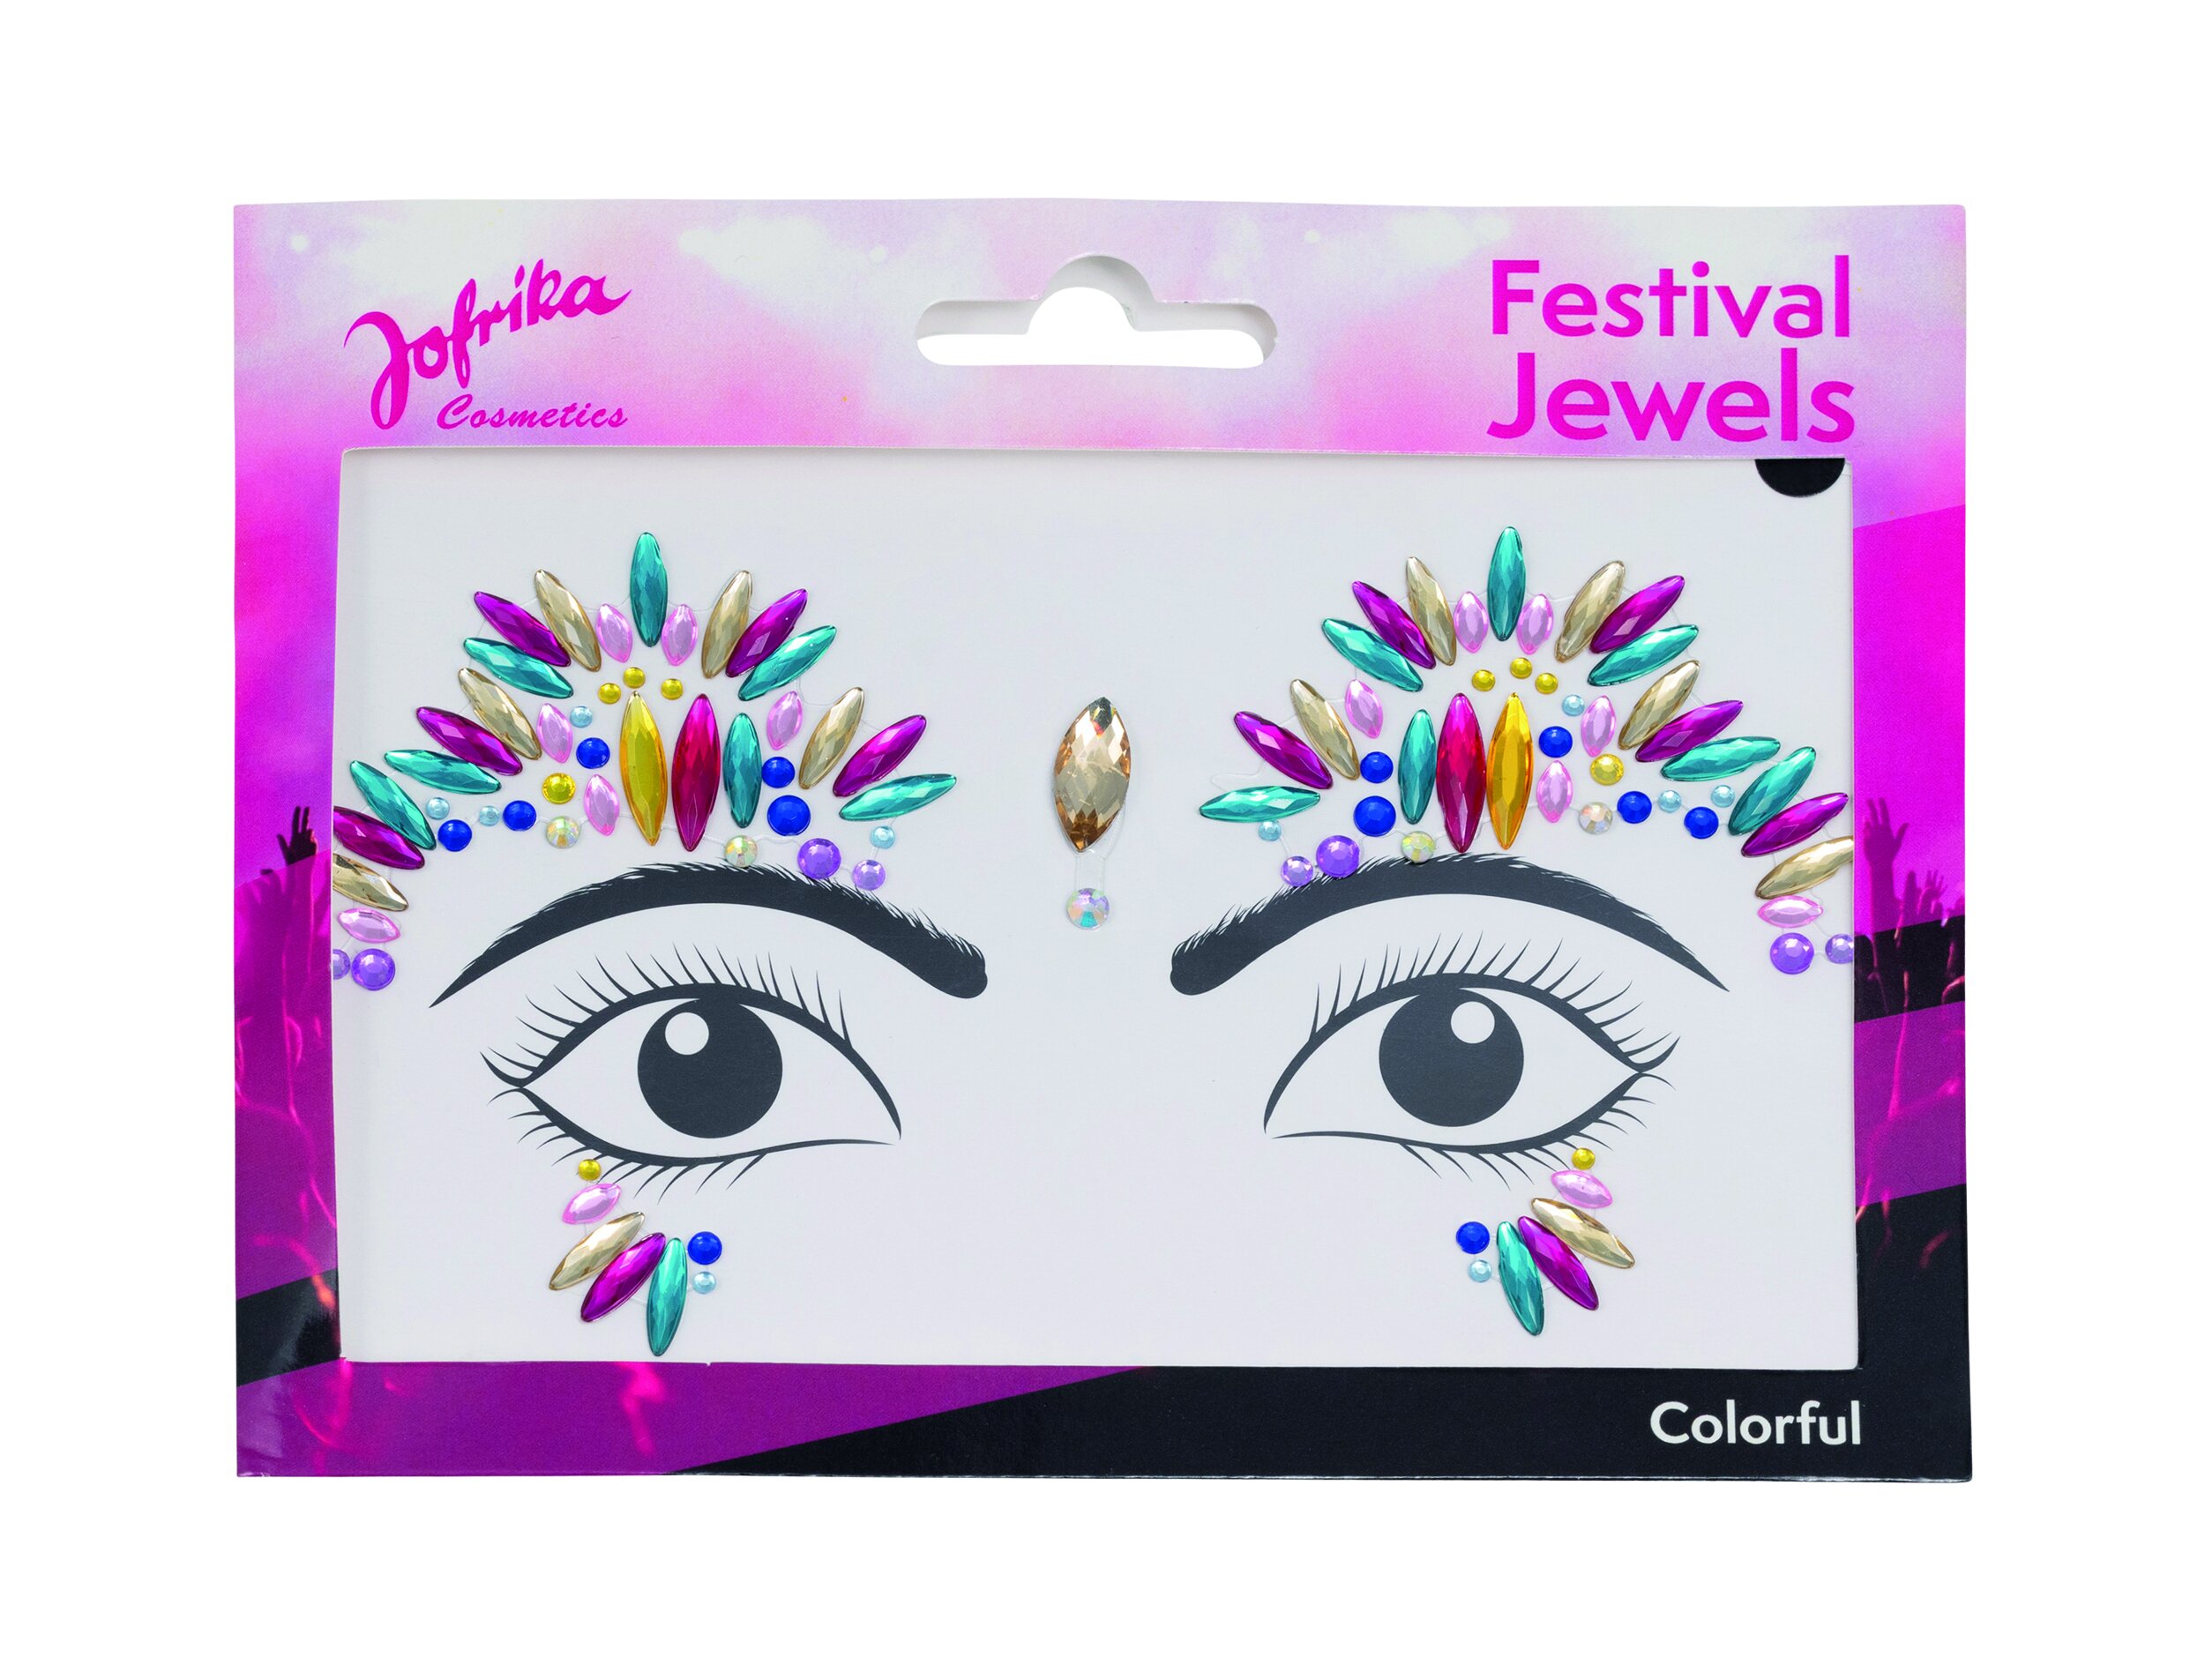 Festival Jewels, Colorful